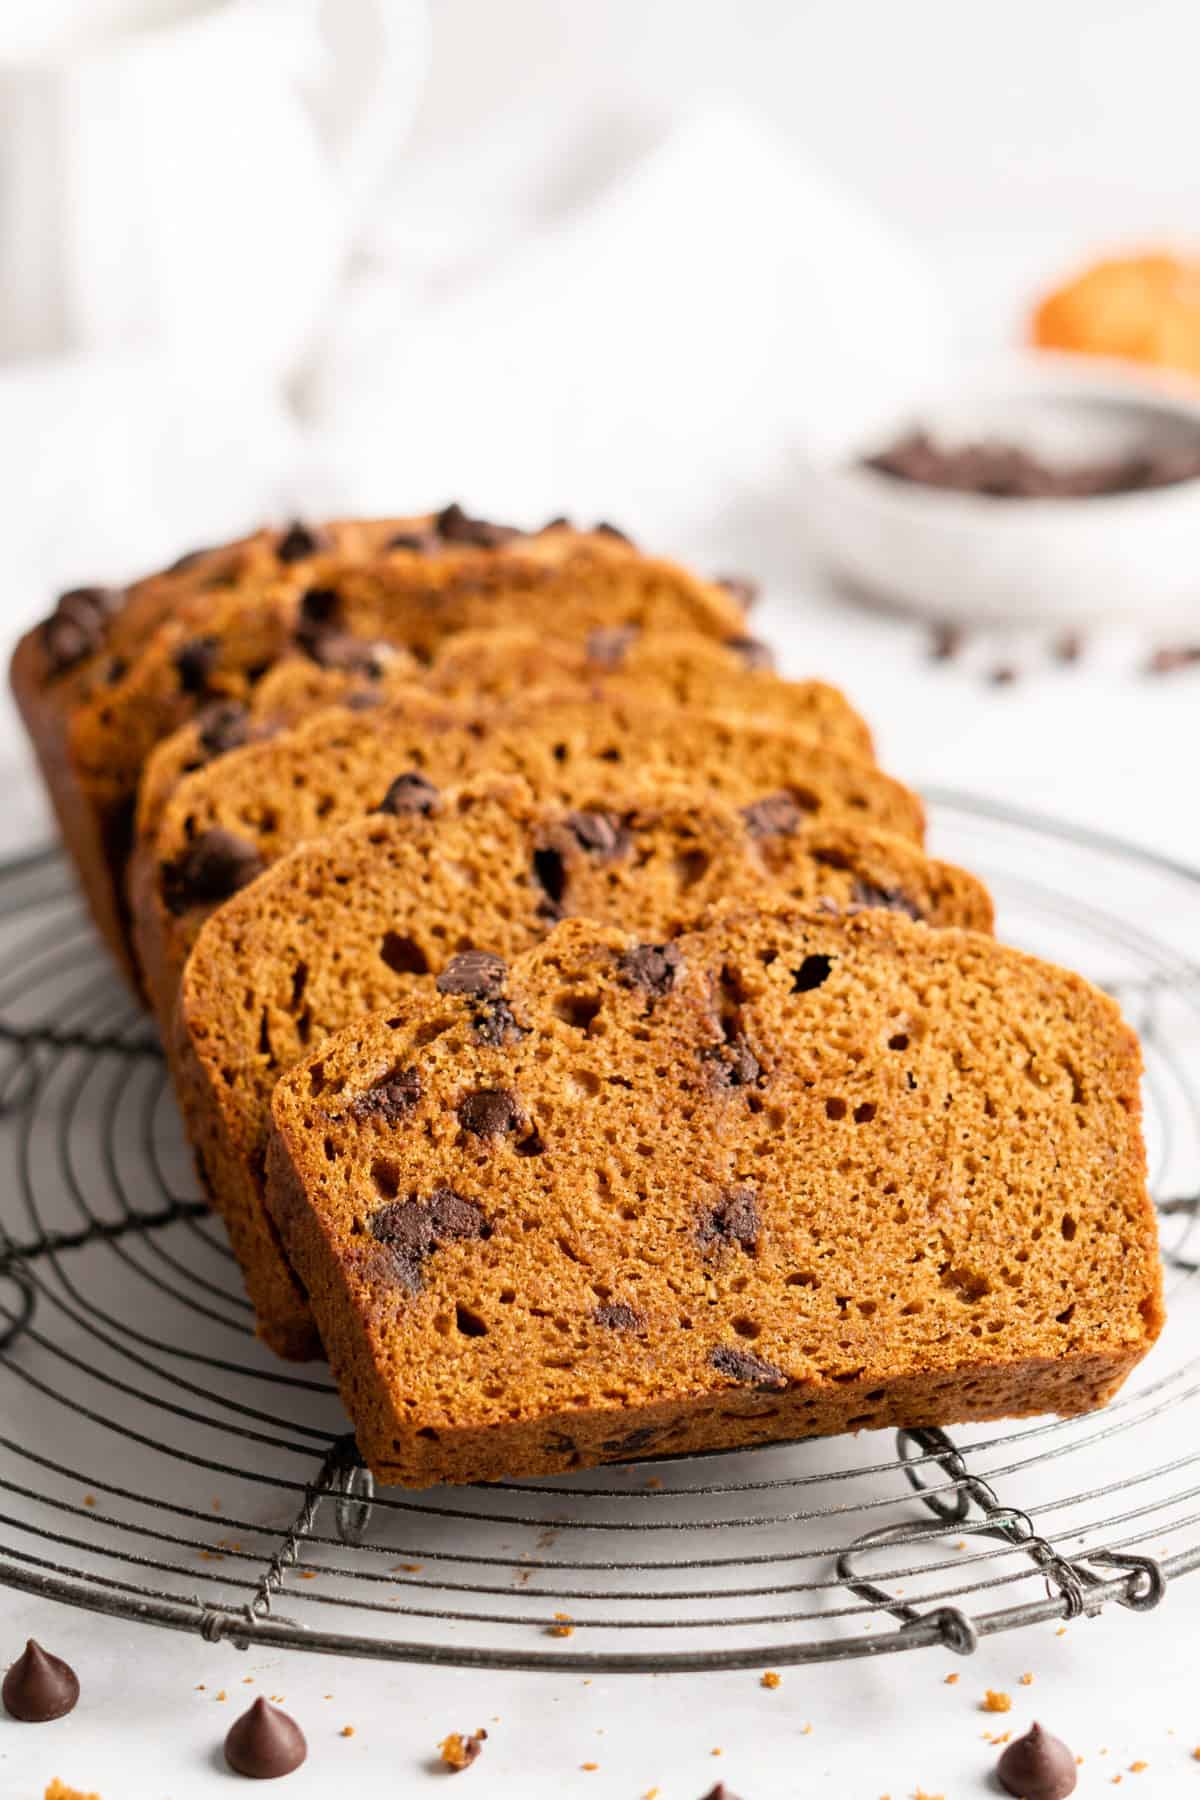 Slices of chocolate chip pumpkin bread on round wire cooling rack